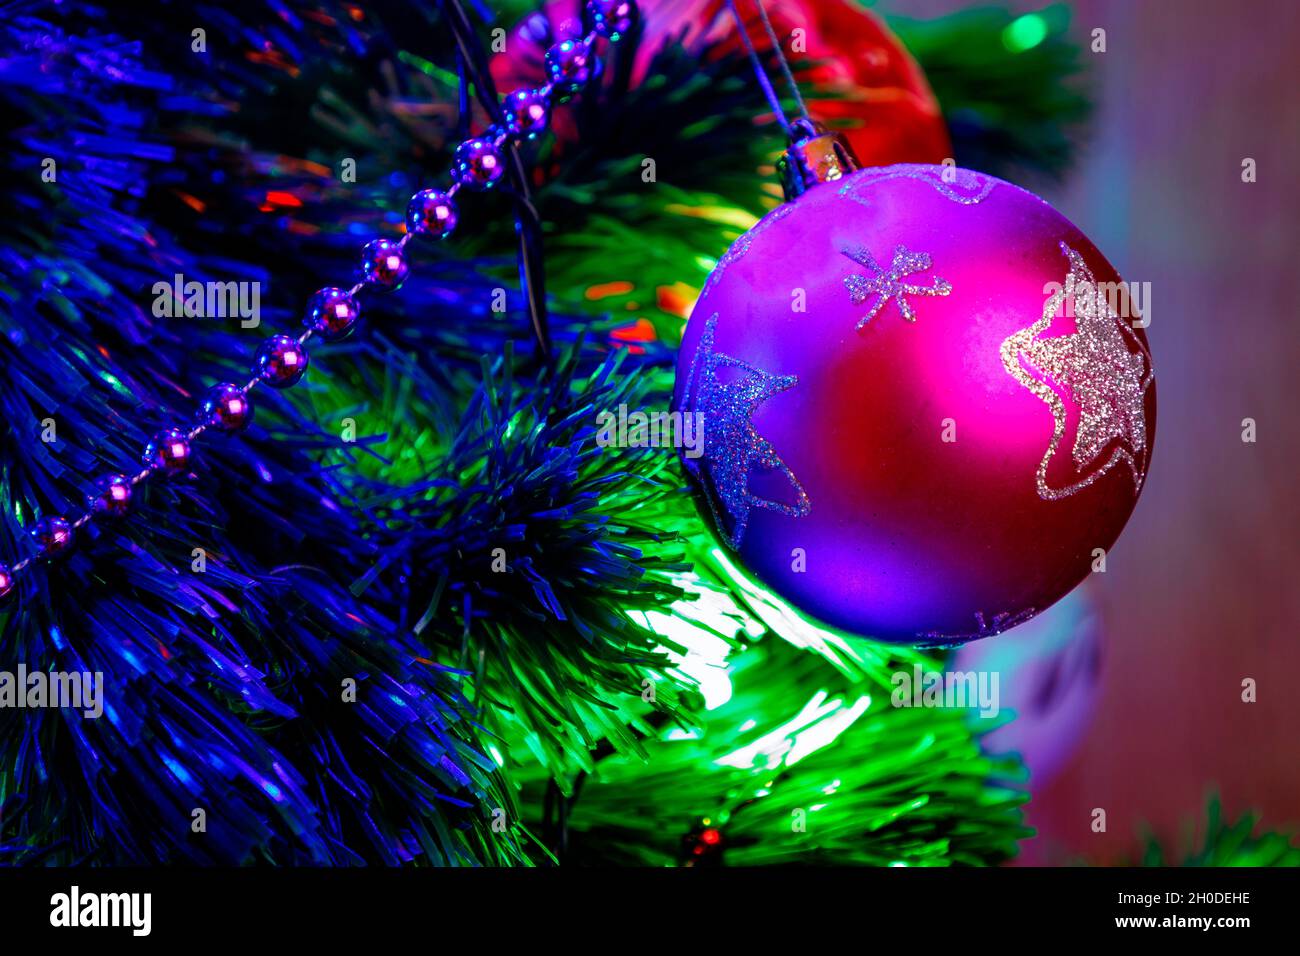 Christmas ball decoration of the Christmas tree with purple and blue tones Stock Photo